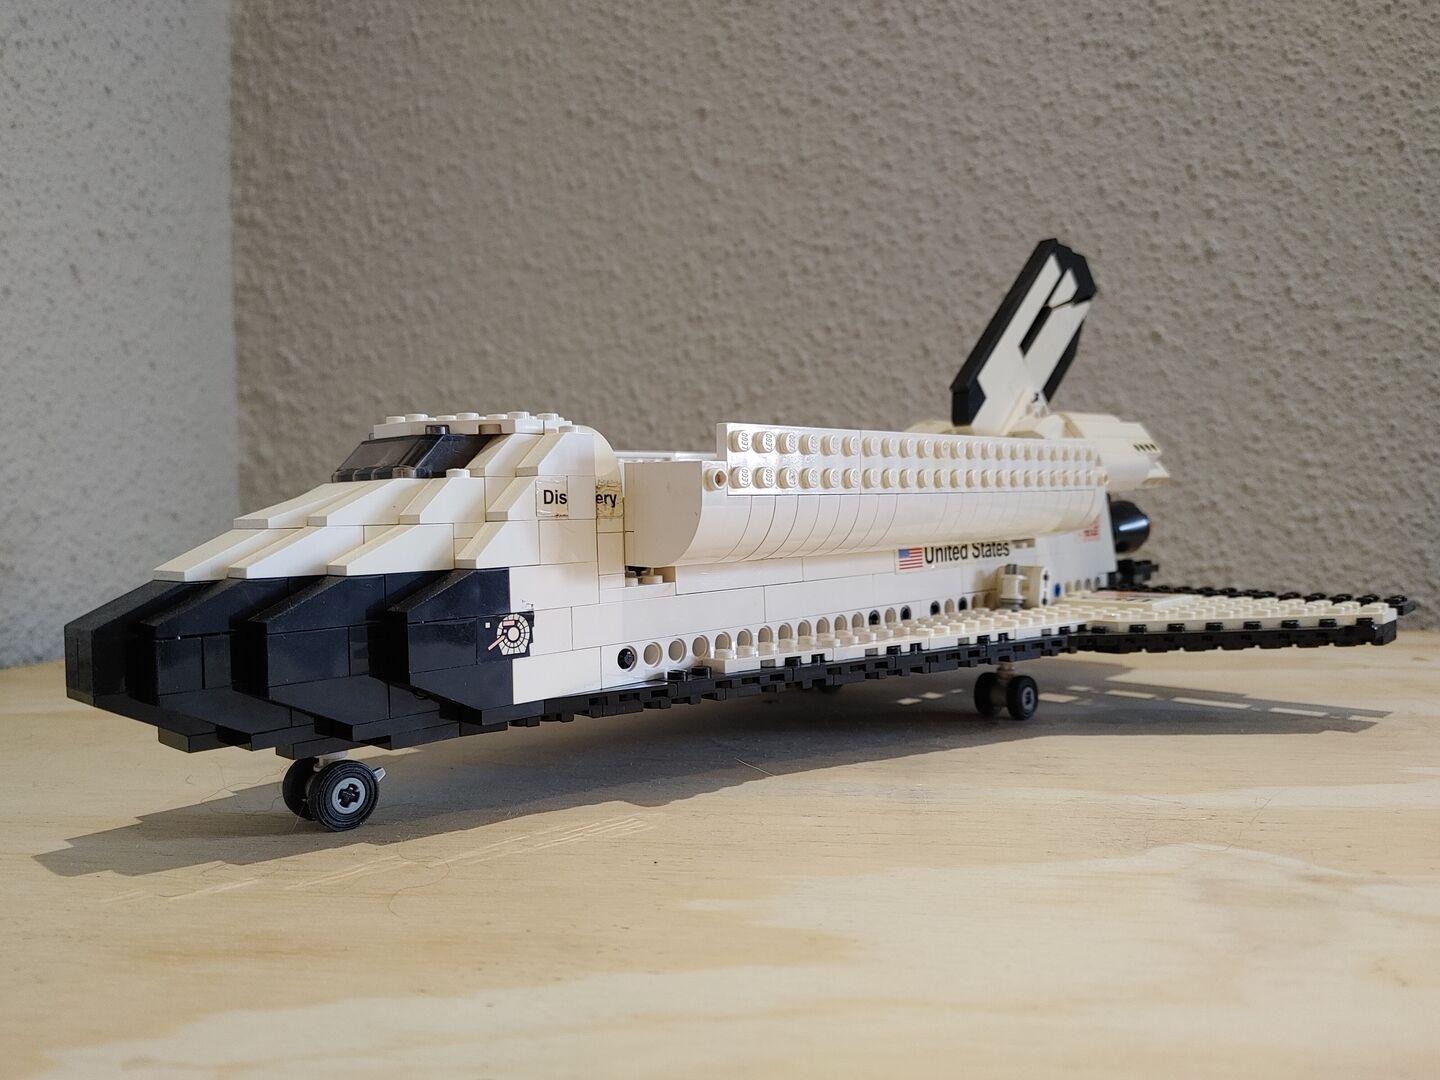 lego space shuttle discovery amazon